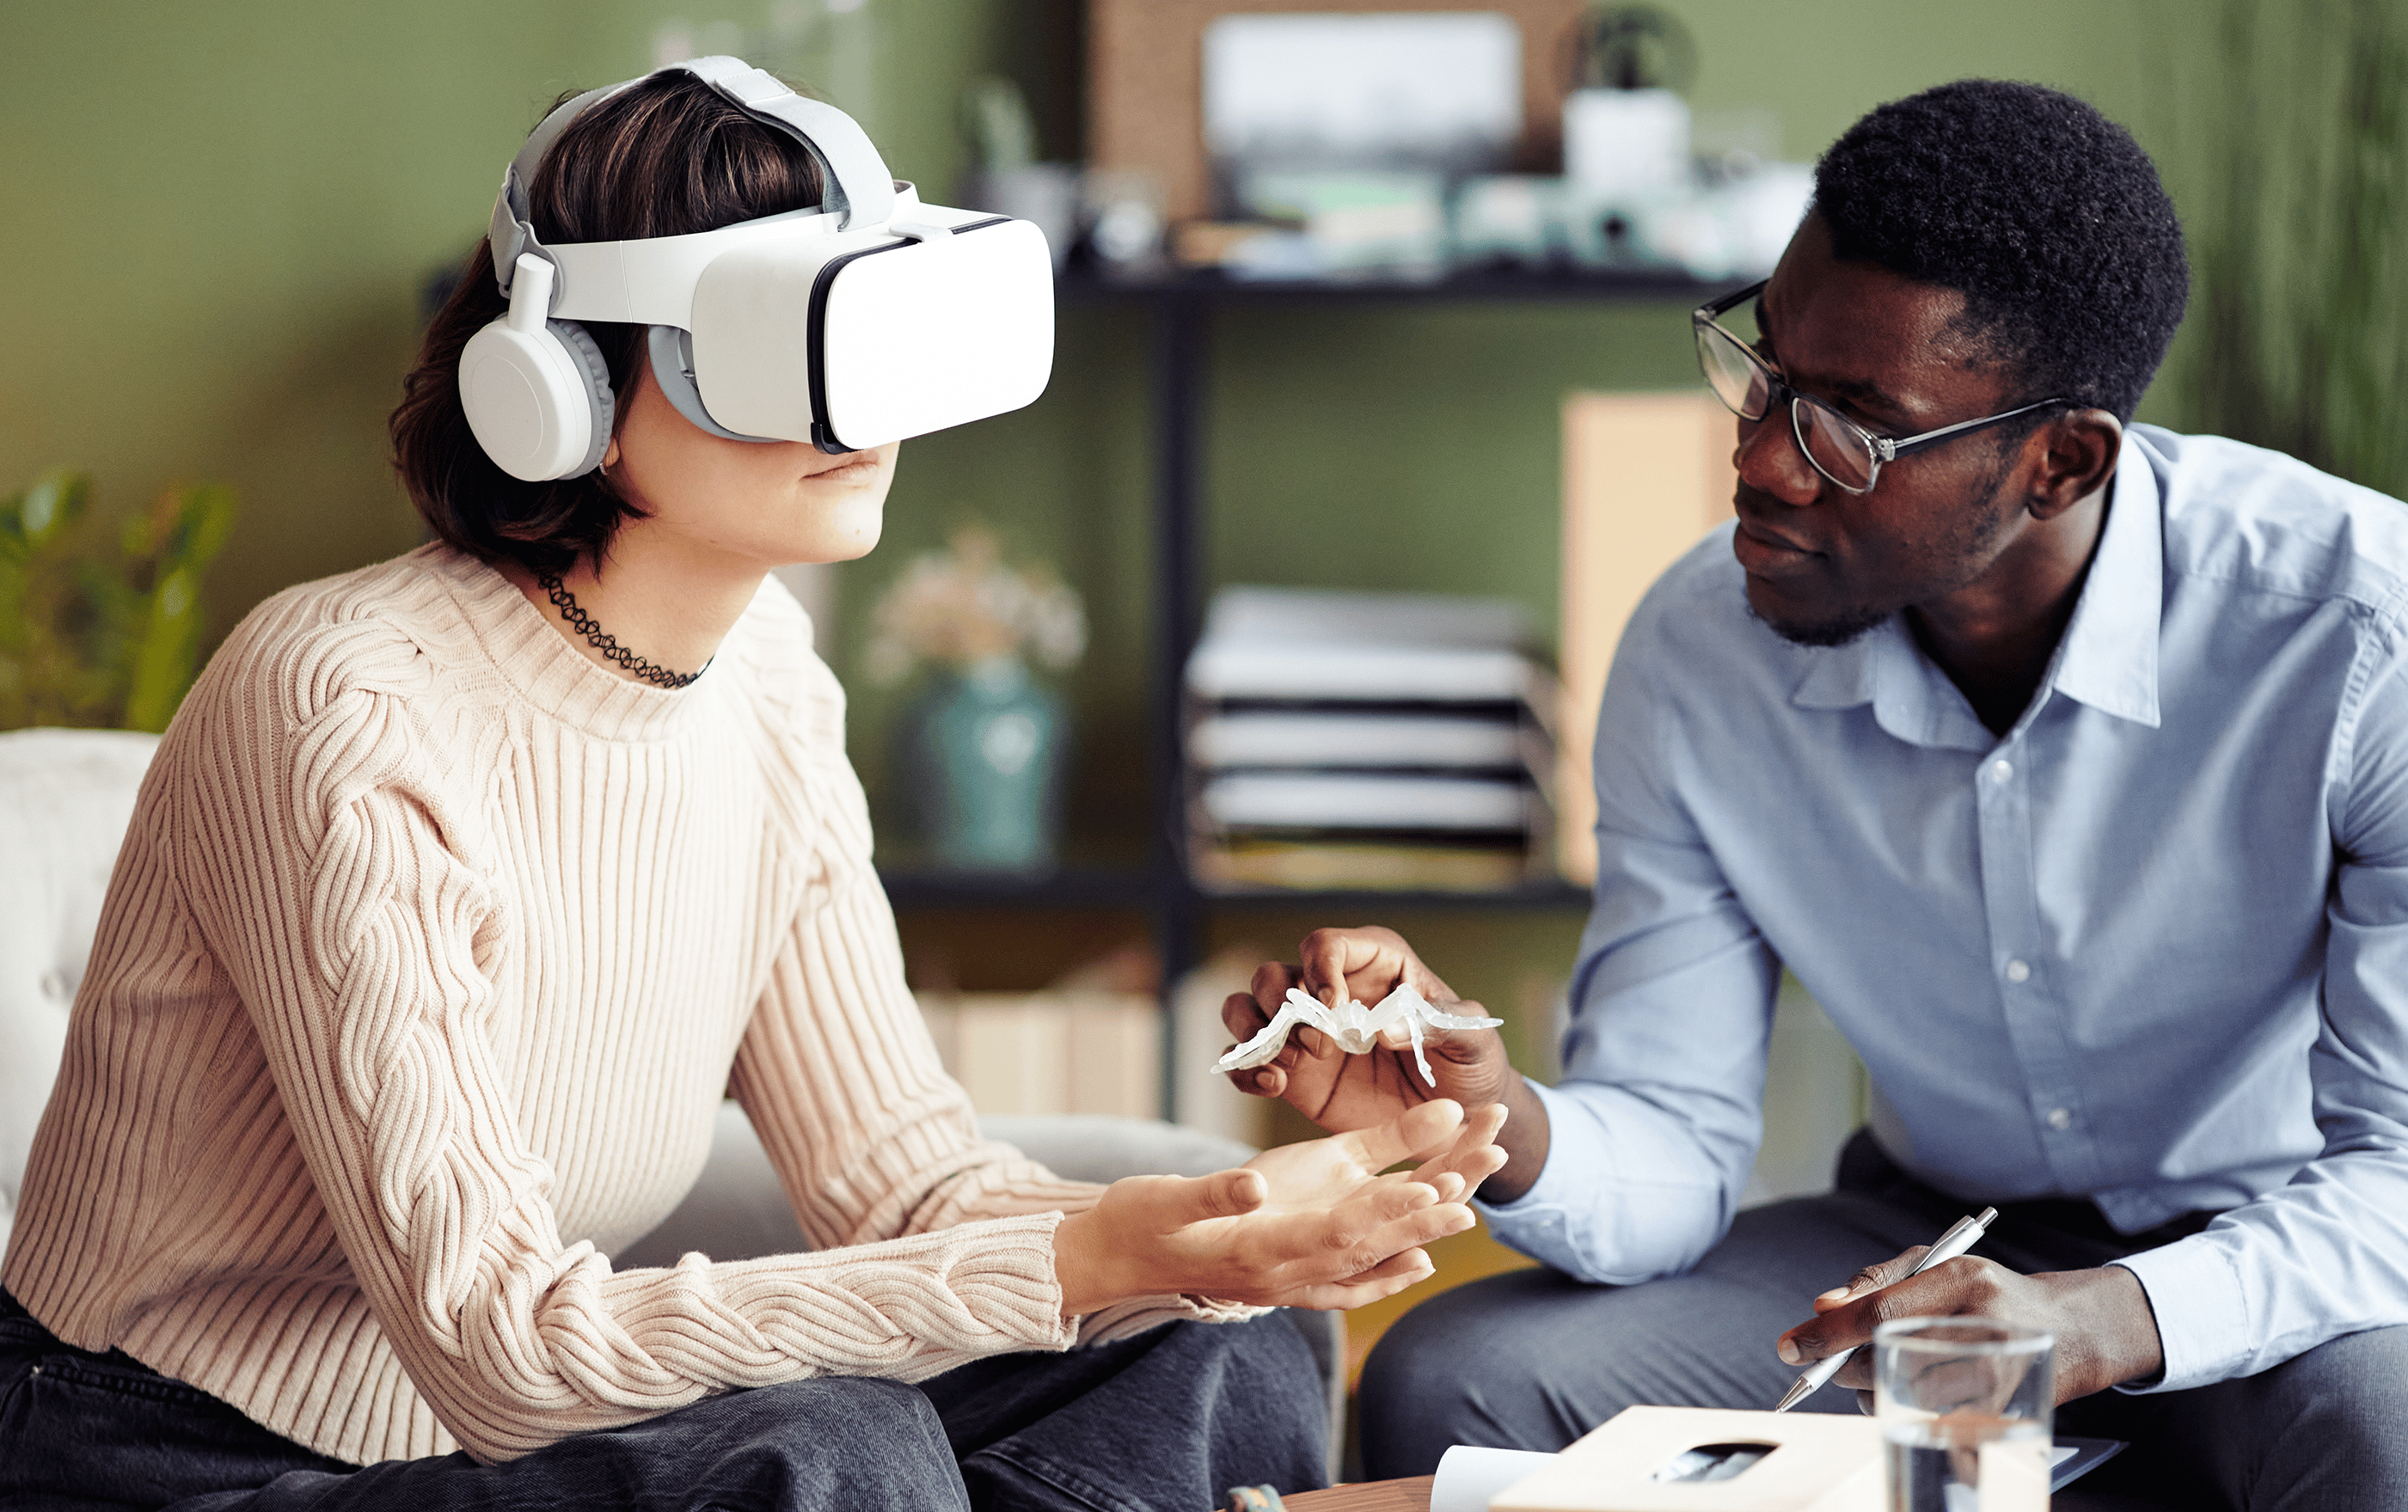 When searching for images related to virtual reality therapy for mental health, consider using keywords like "virtual reality therapy mental health," "VR therapy benefits," and "VR mental health sessions."